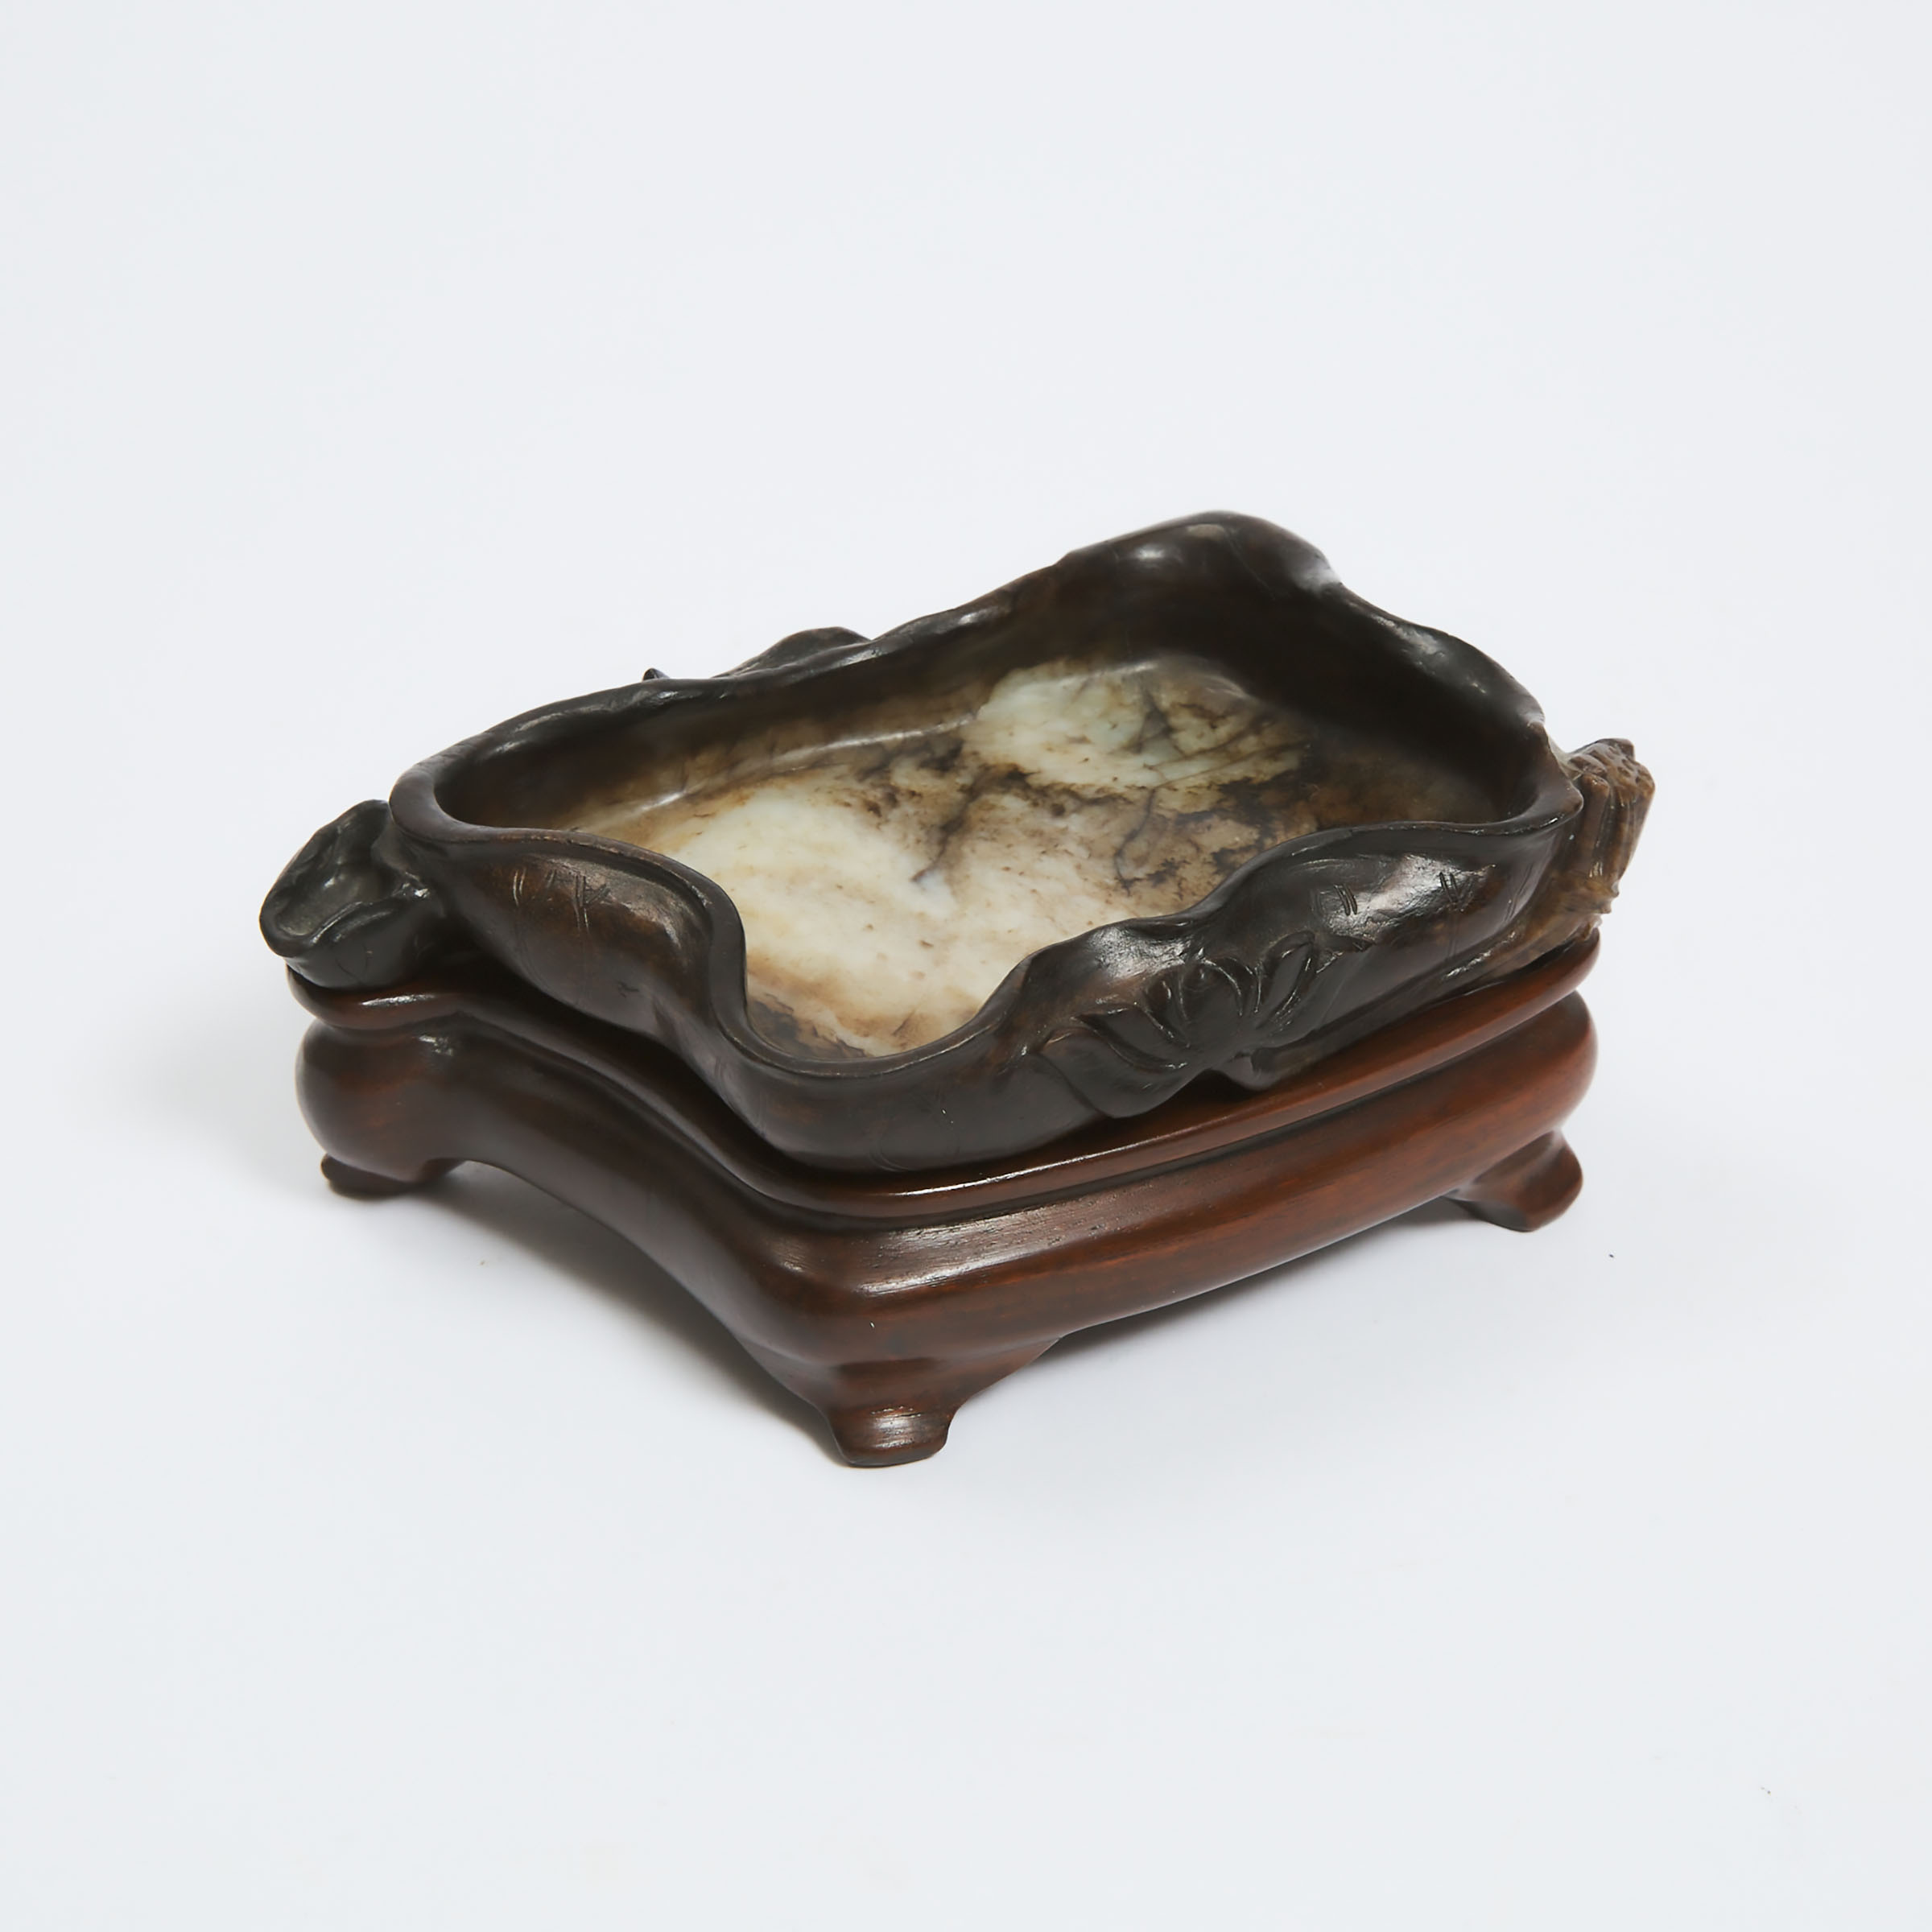 A Black, Beige and Russet Jade 'Lotus' Brush Washer, Ming Dynasty